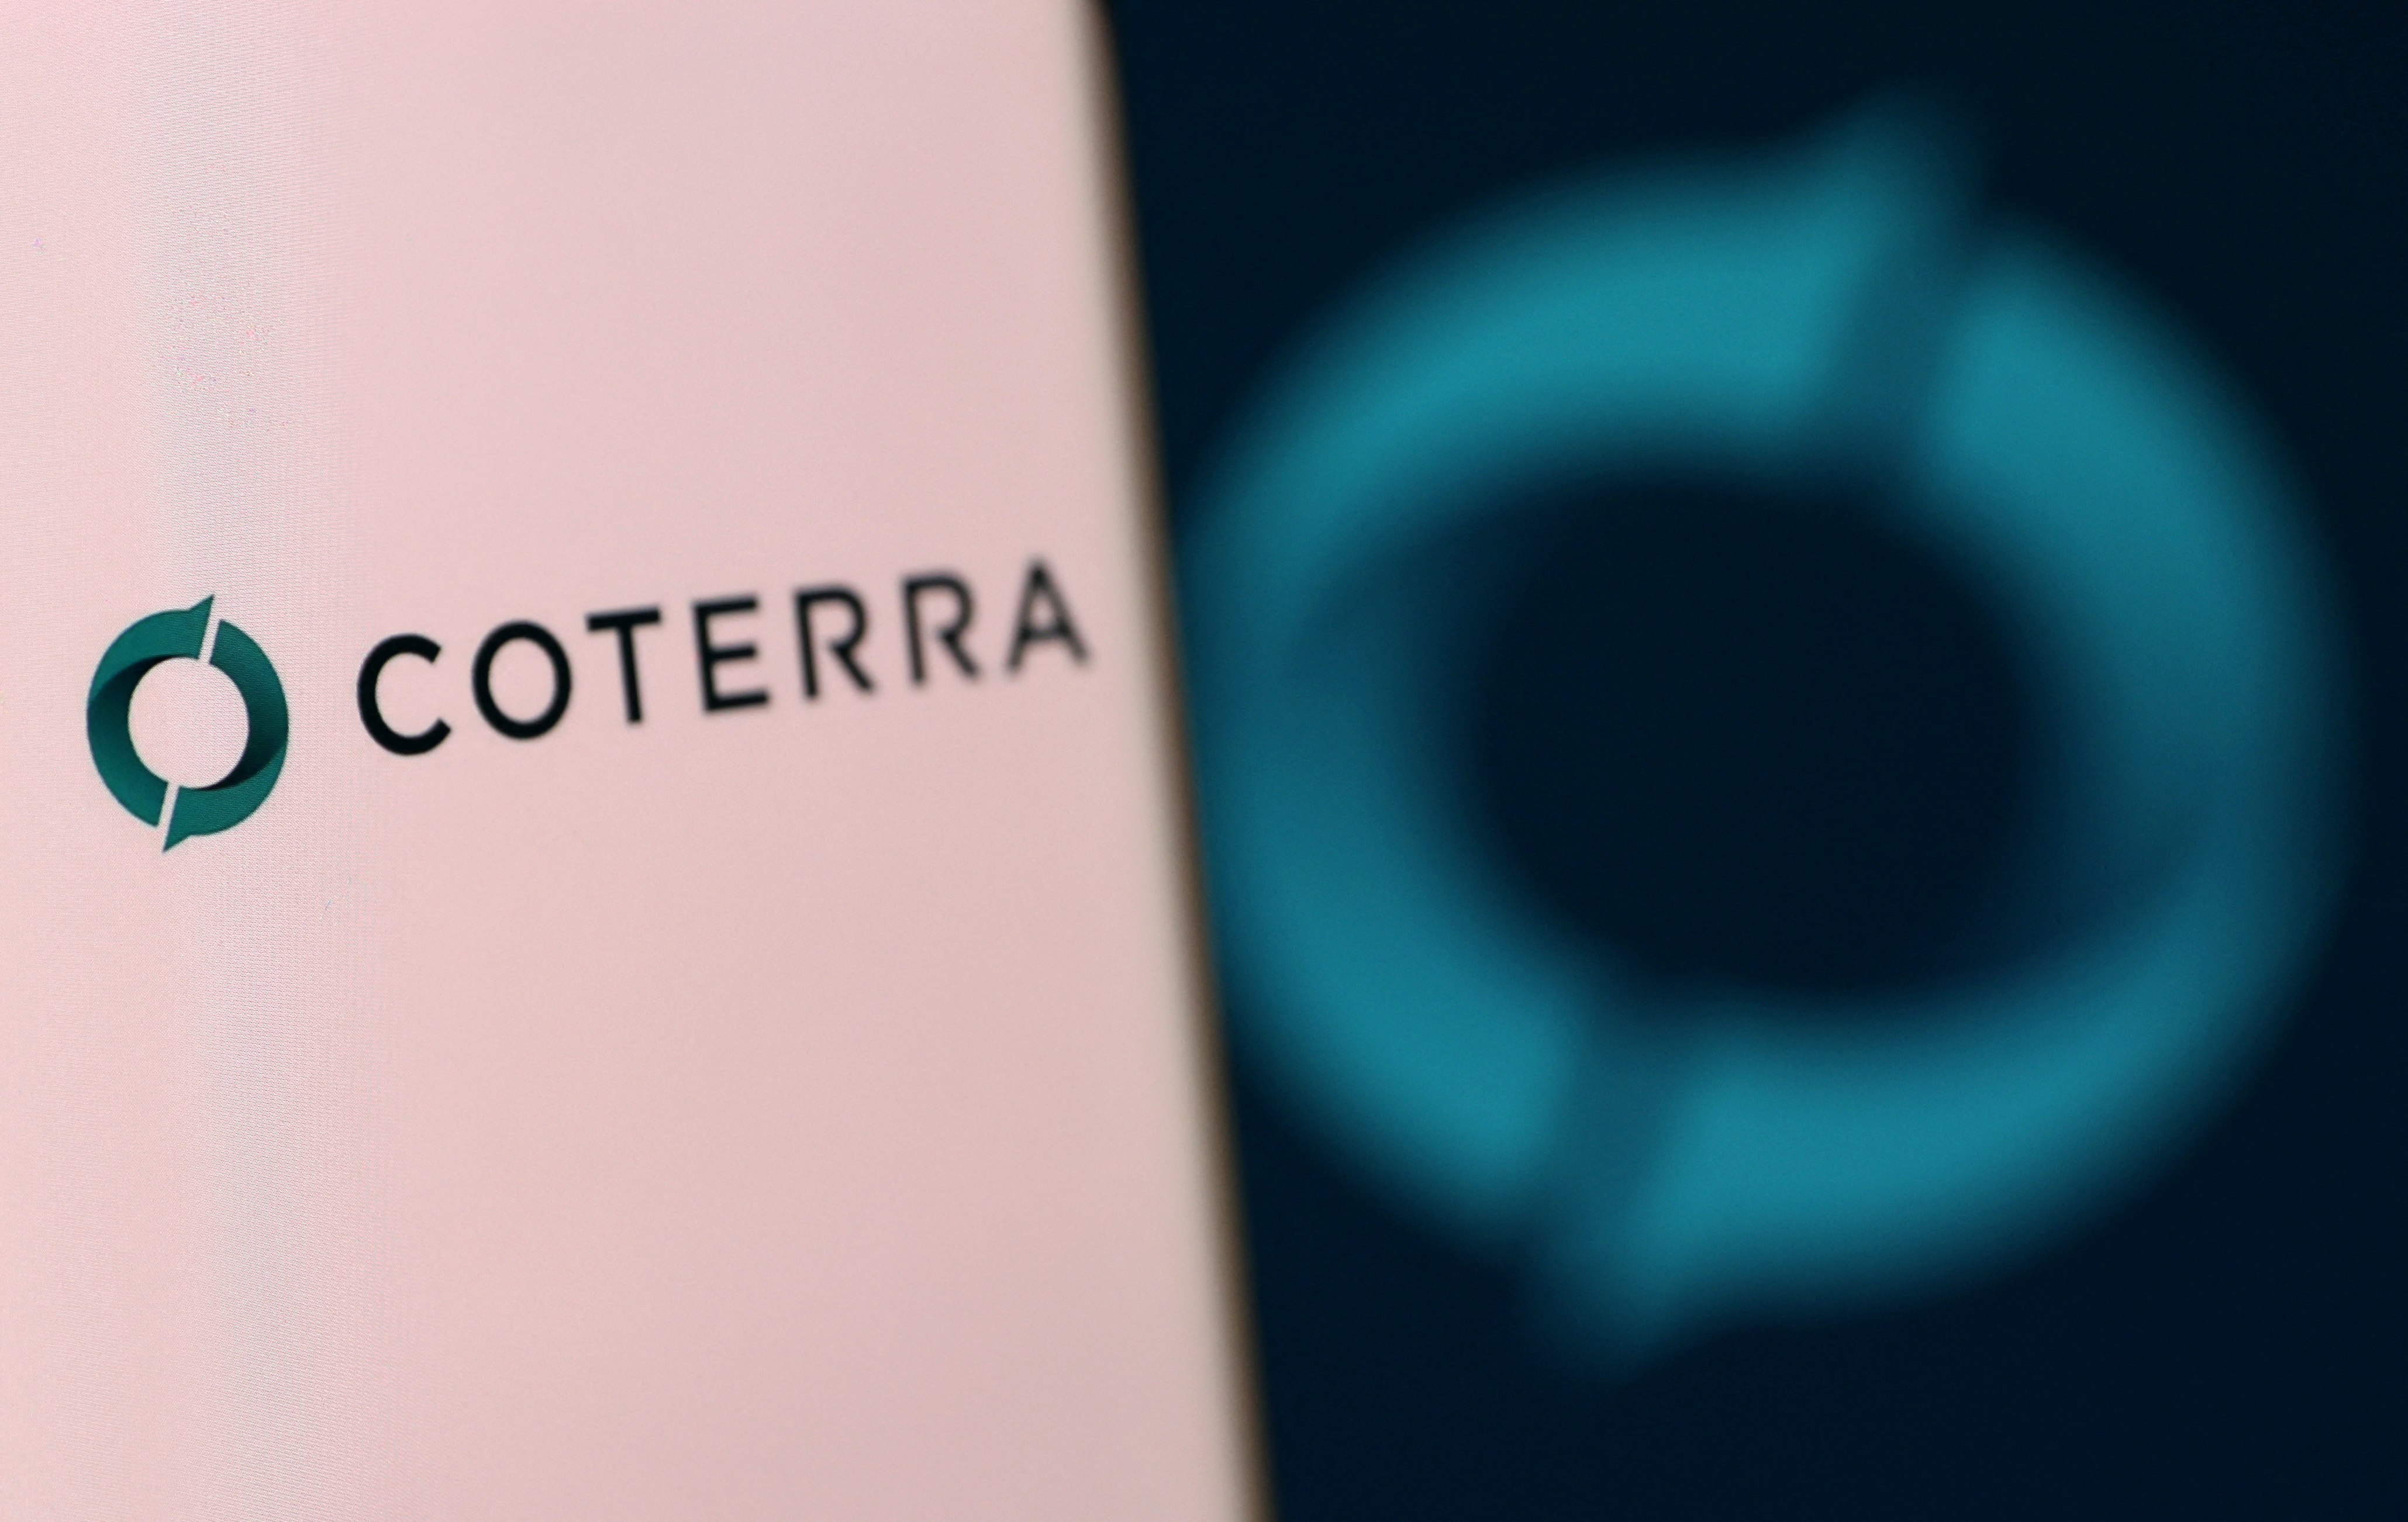 Illustration shows smartphone with Coterra Energy's logo displayed